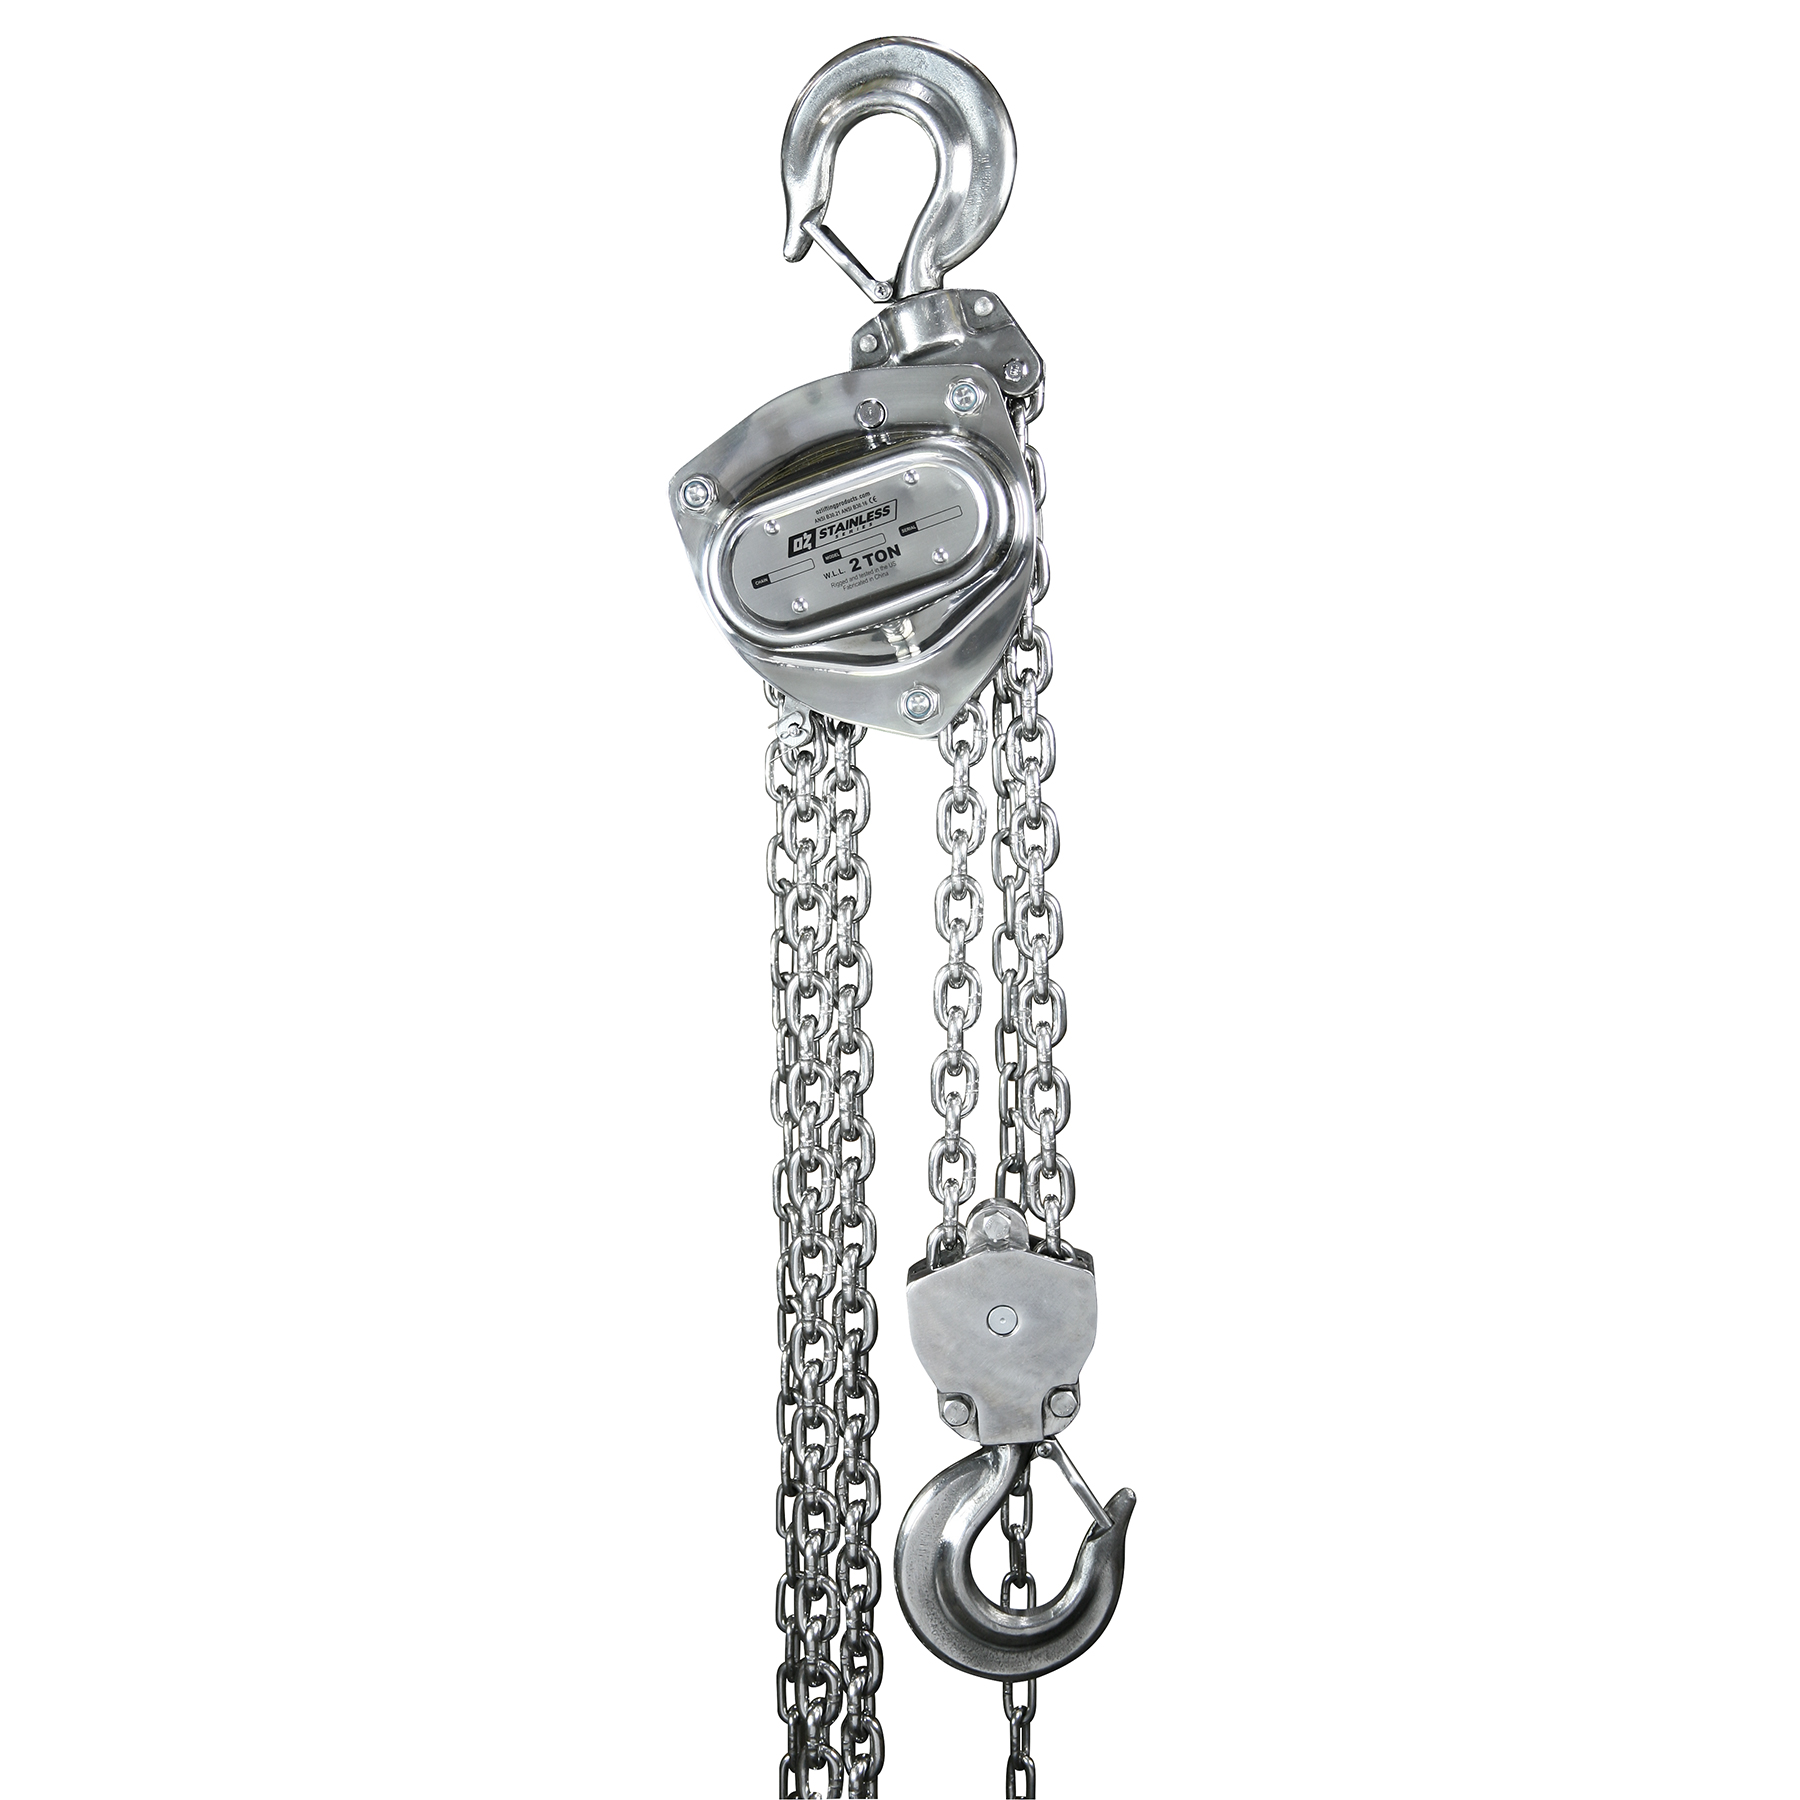 The chain hoist, available in 1 ton and 2 ton capacities, is designed for use in corrosive environments.